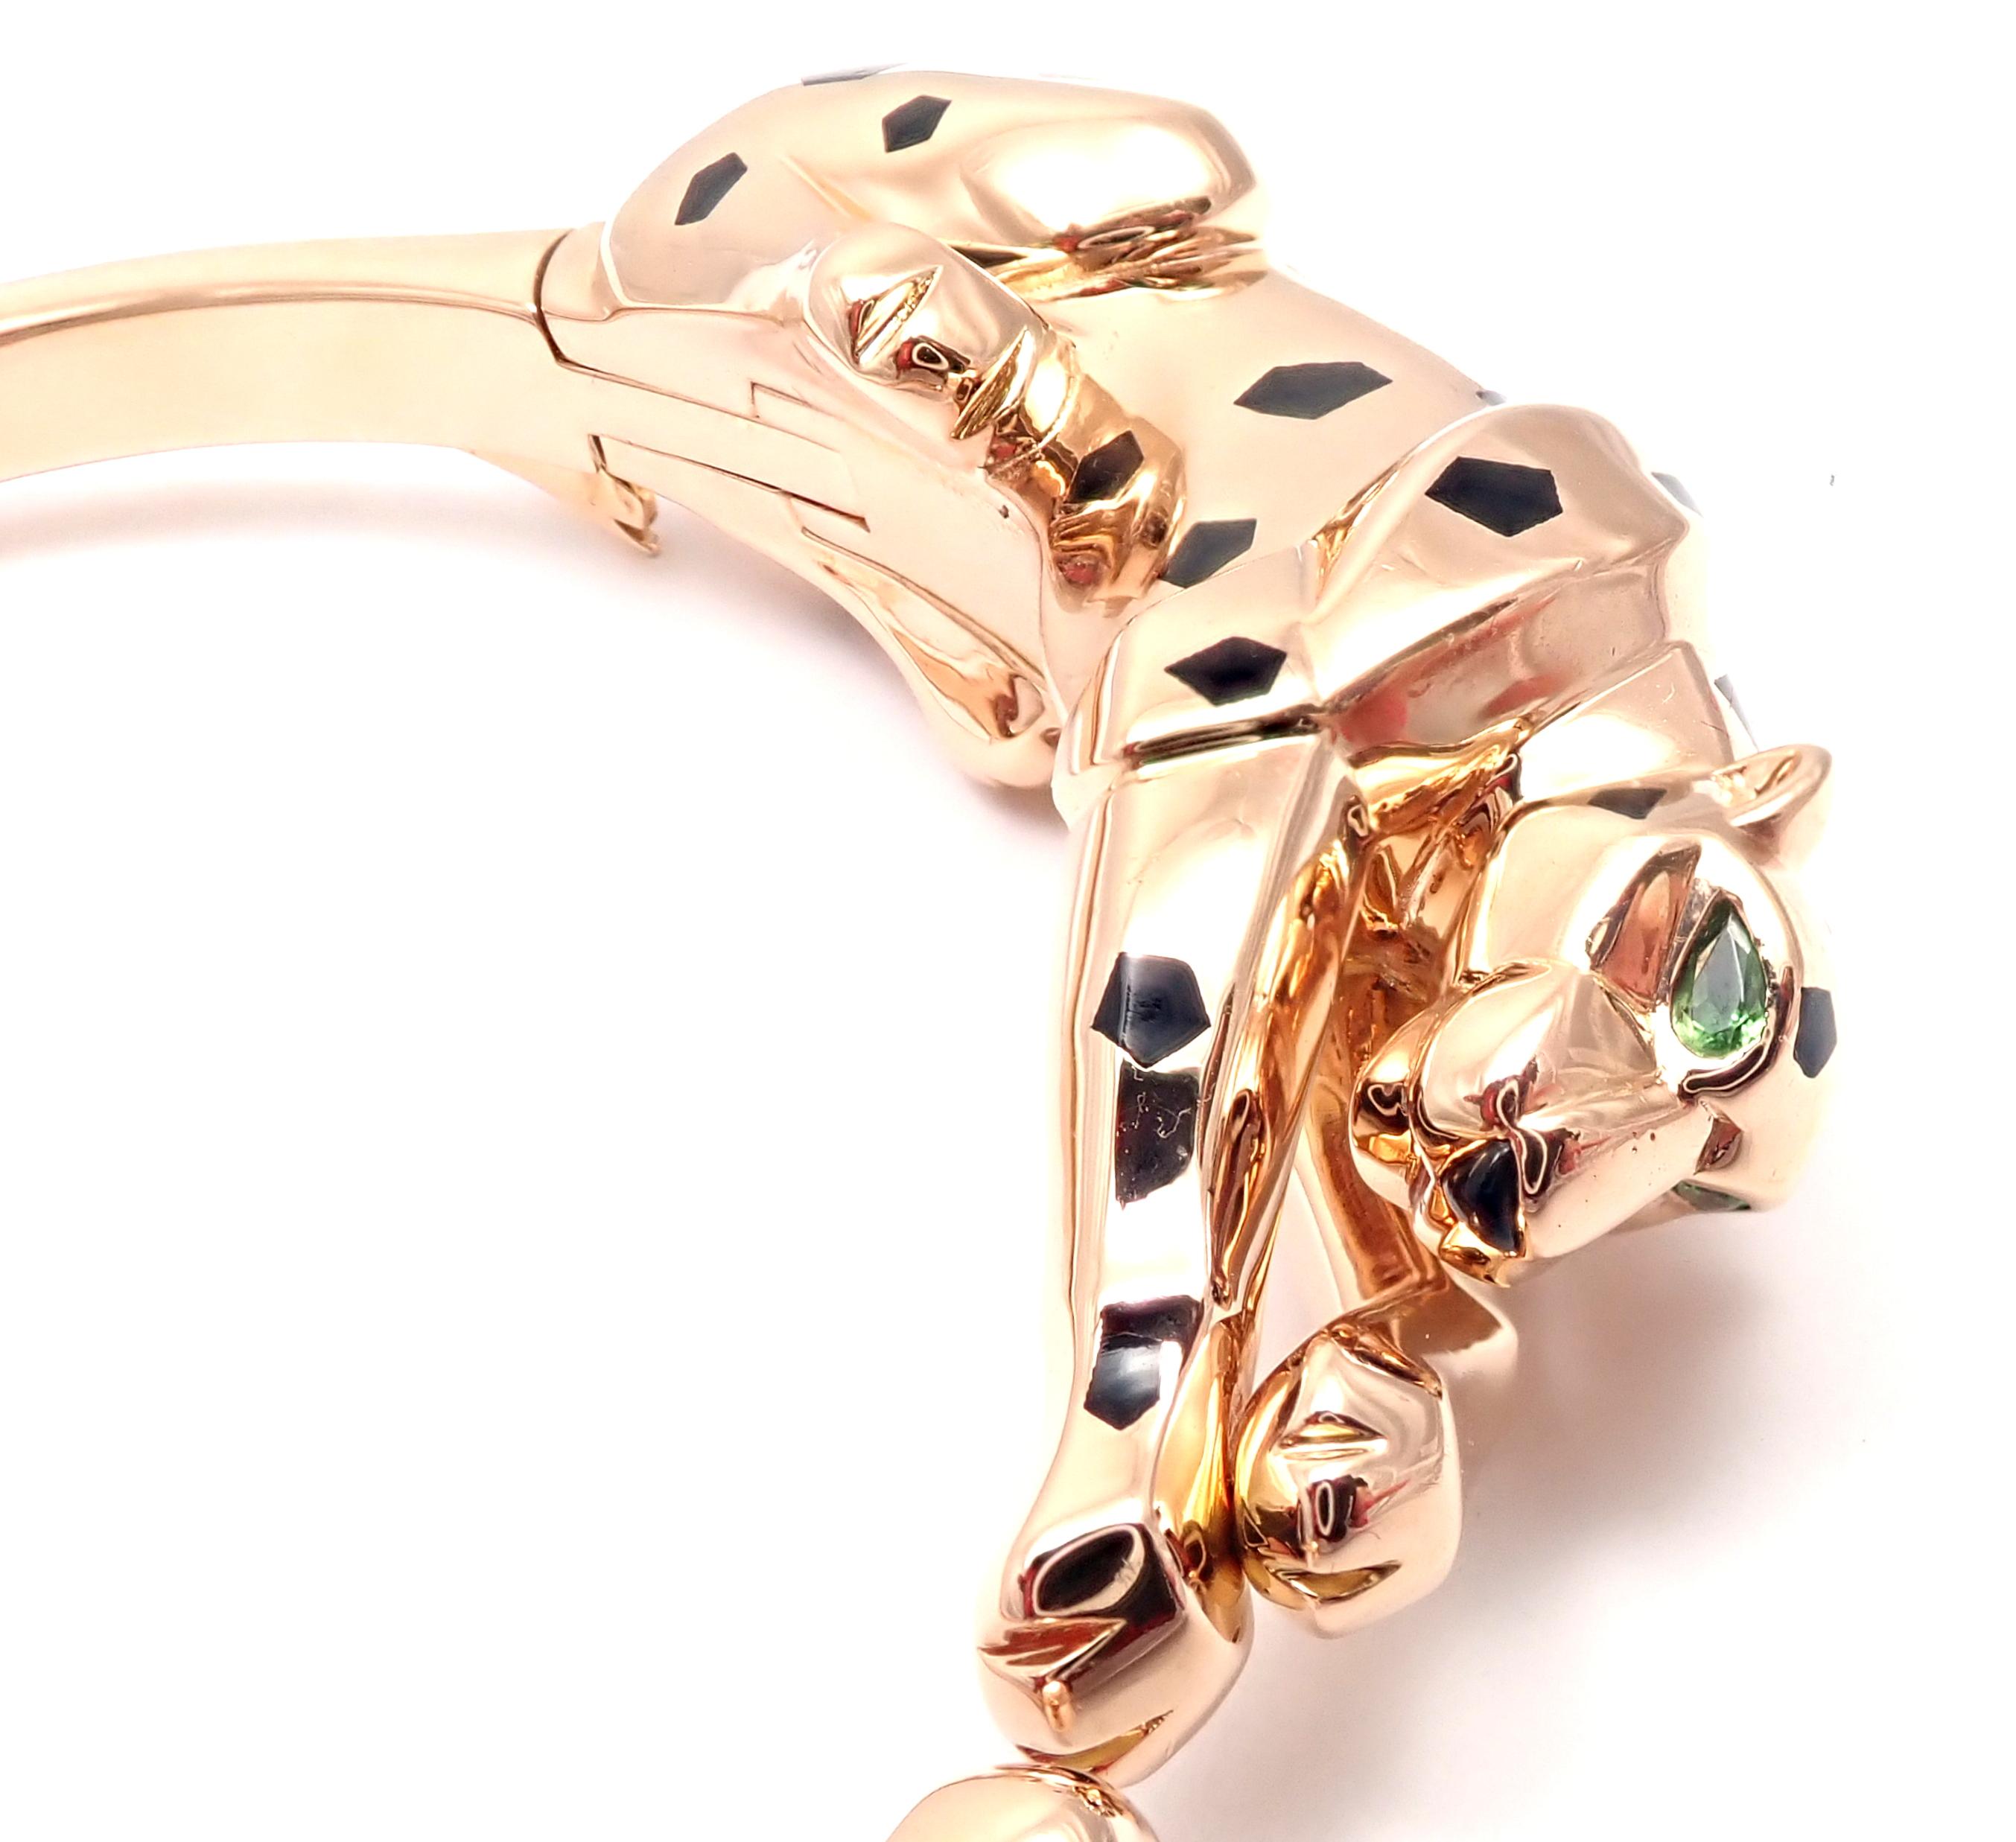 18k Rose Gold Panther Panthere Tavorite Onyx Panther Bangle Bracelet by Cartier.
With 2 Tsavorite Garnets in the eyes, 1 black onyx nose and black lacquer.
This beautiful bracelet comes with its original Cartier box and a service paper from Cartier